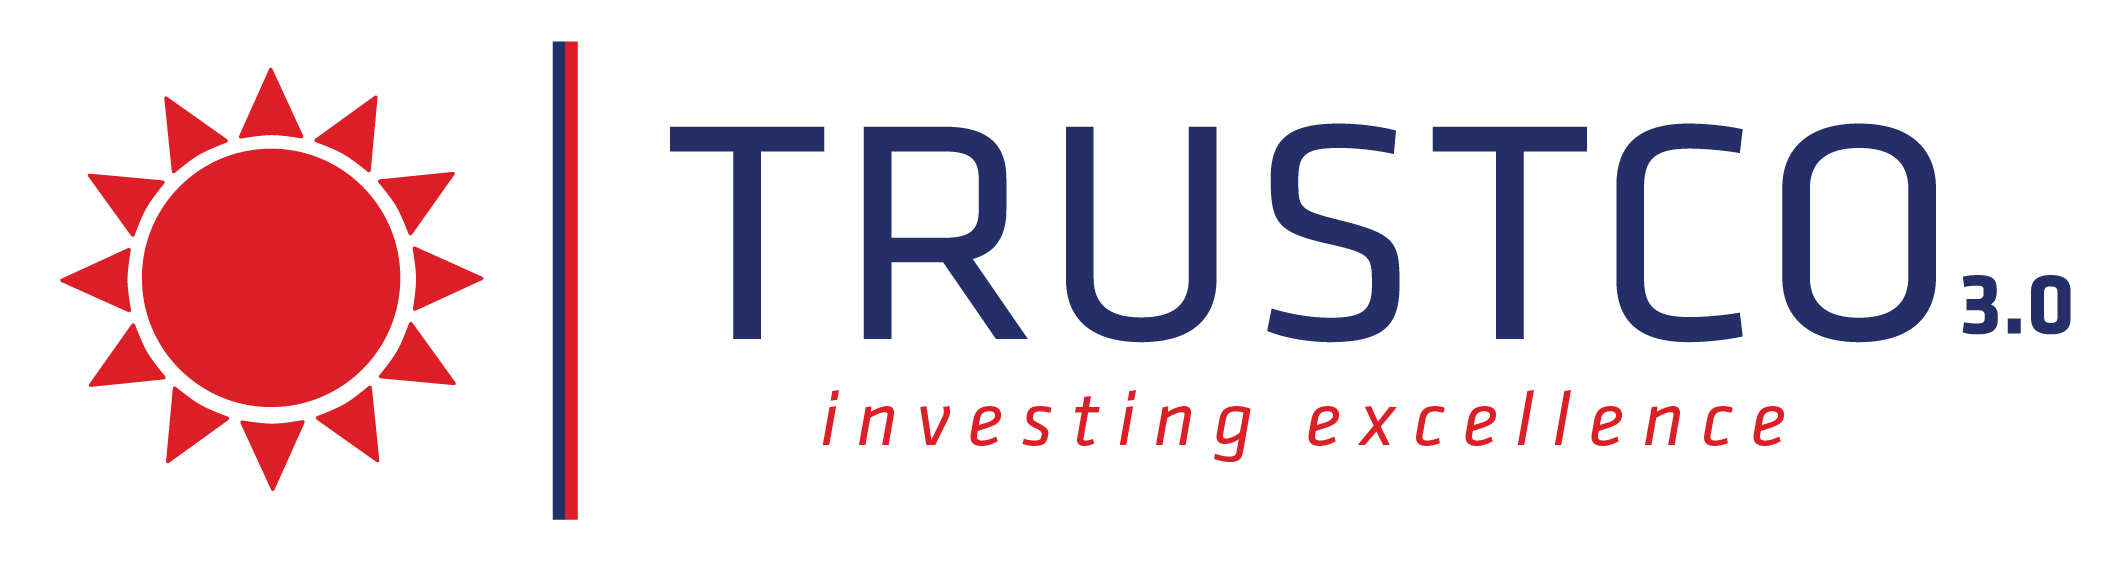 TRUSTCO GROUP ANNOUNCES NAD 4.4 BILLION (USD 235 MILLION) TRANSACTION WITH FOUNDING FAMILY